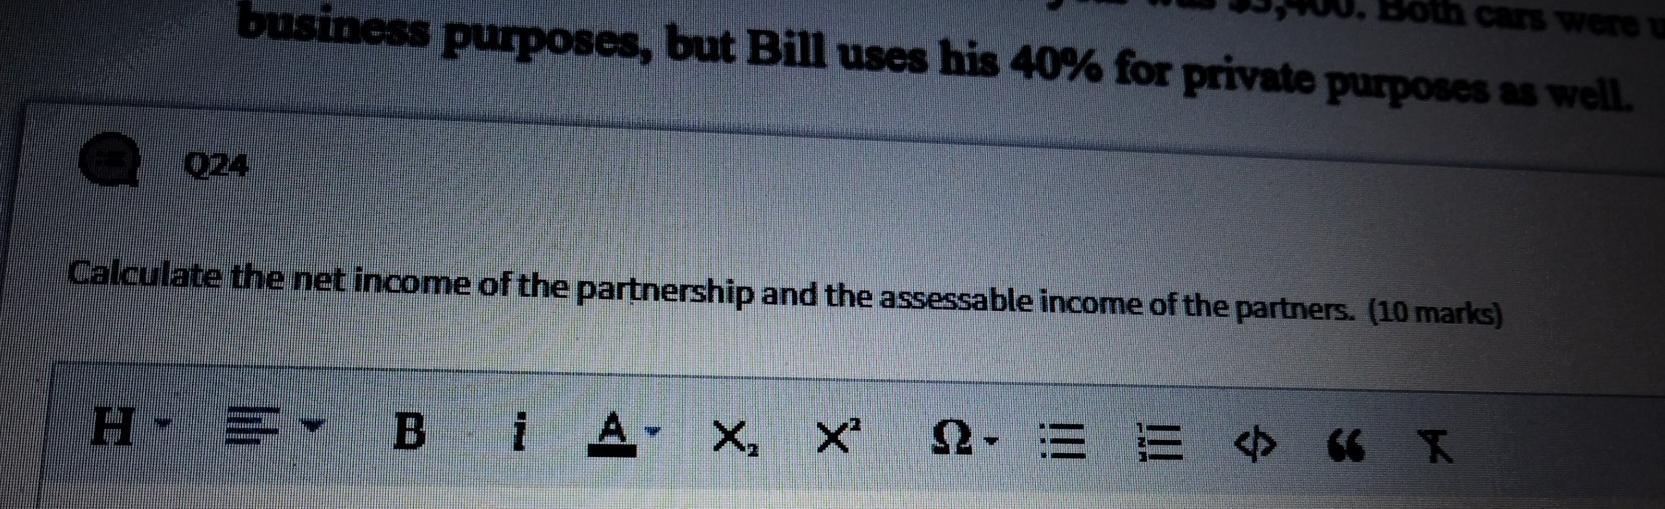 business purposes, but Bill uses his 40% for private purposes as well. oth cars were 024 Calculate the net income of the part